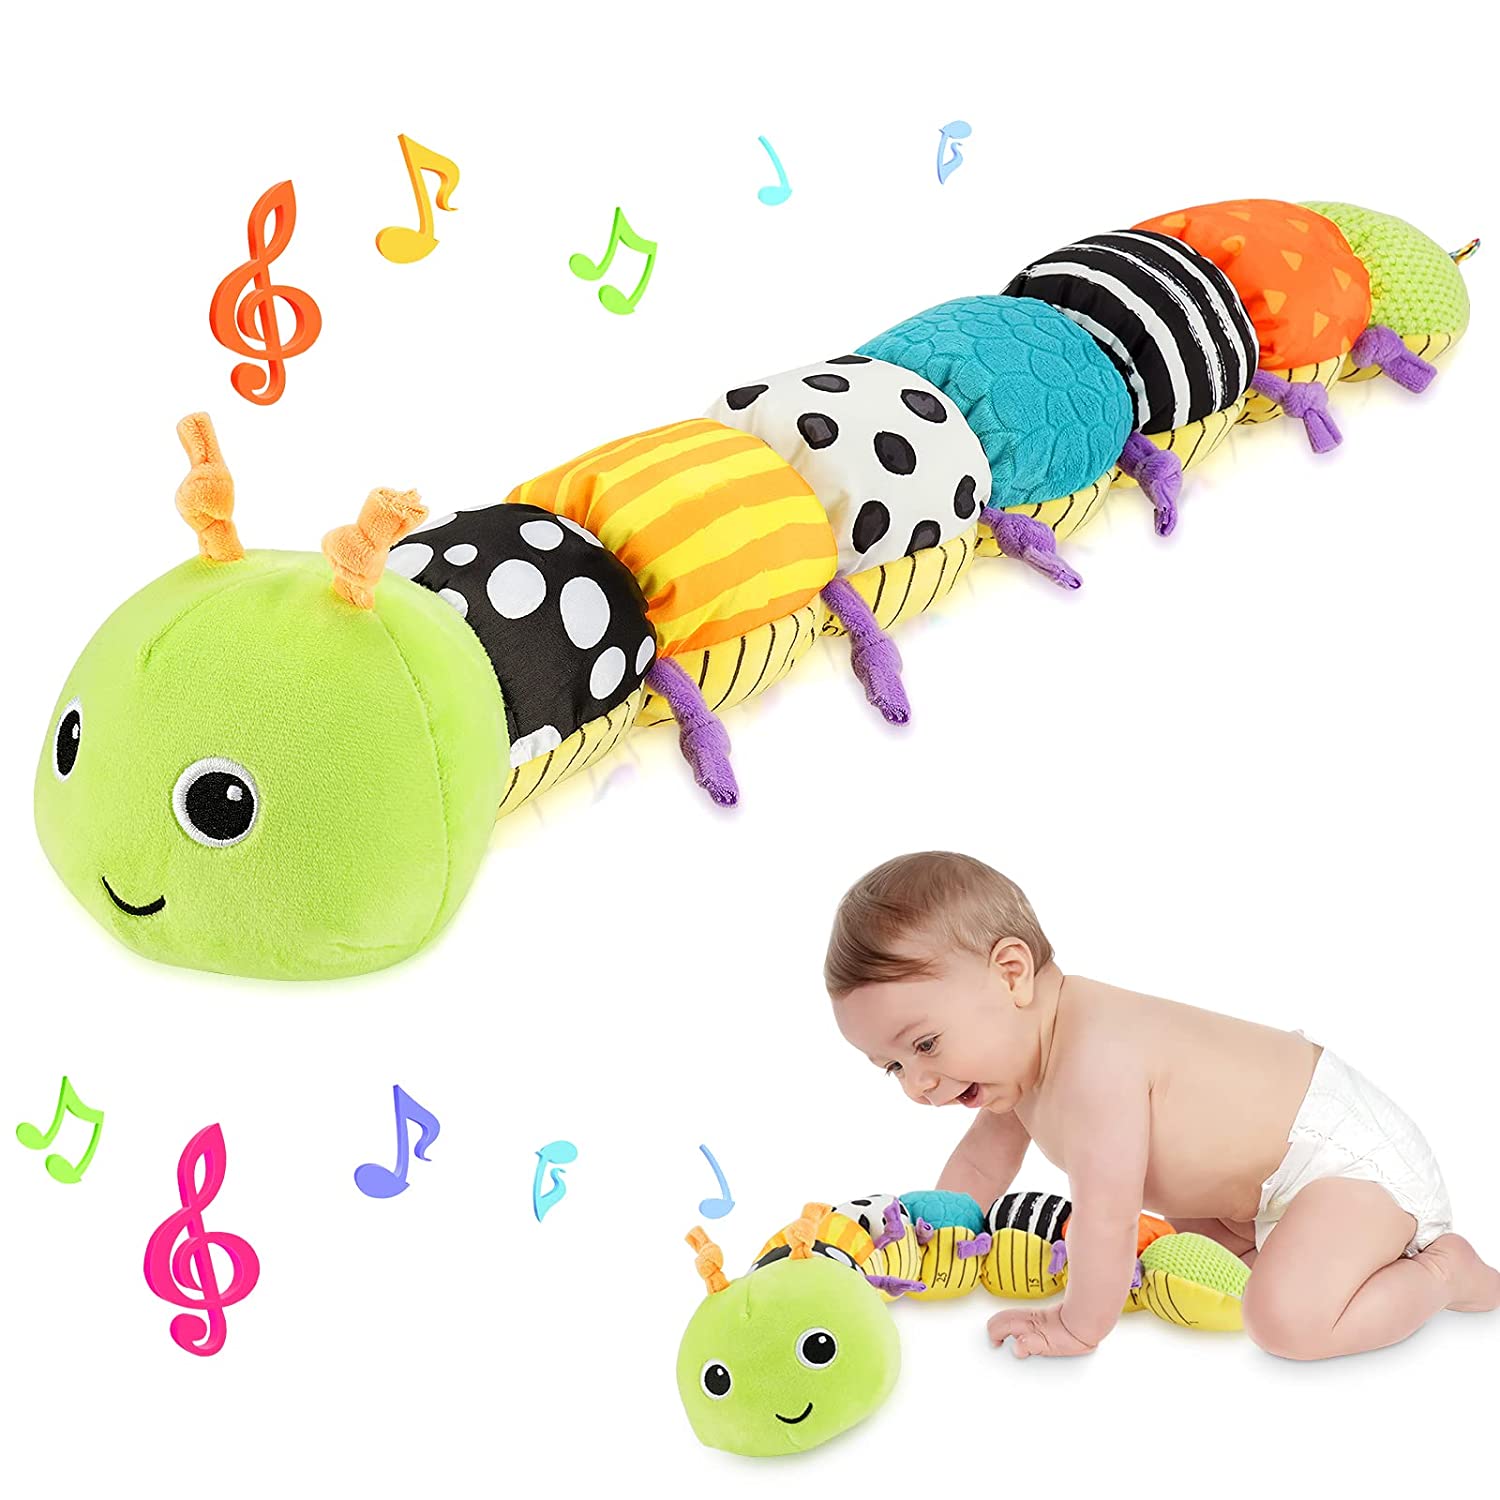 FourAll-Toys, Kids & Baby Musical Caterpillar Stuffed Animal Toys Infant Soft Plush Toy with Multi-Sensory Crinkle,Rattle & Textures for Babies 0-12 Months Newborn Children